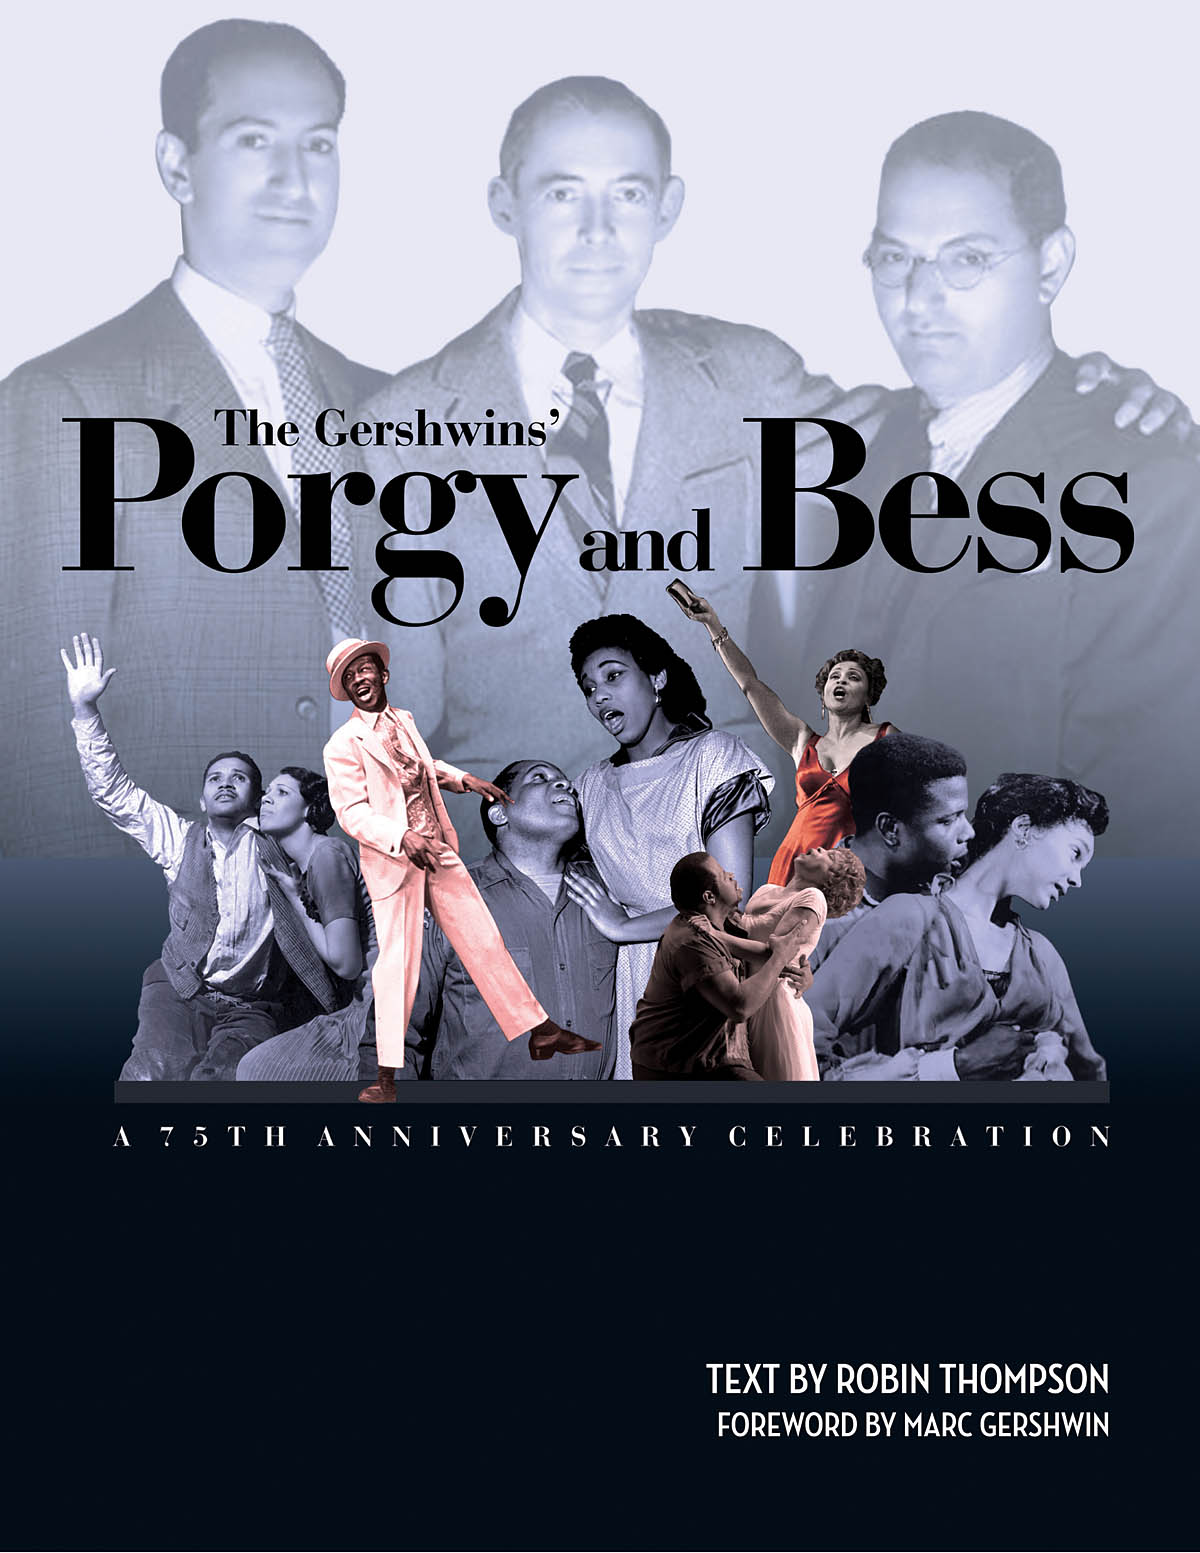 The Gershwins' Porgy And Bess: The 75th Ann. Cel.